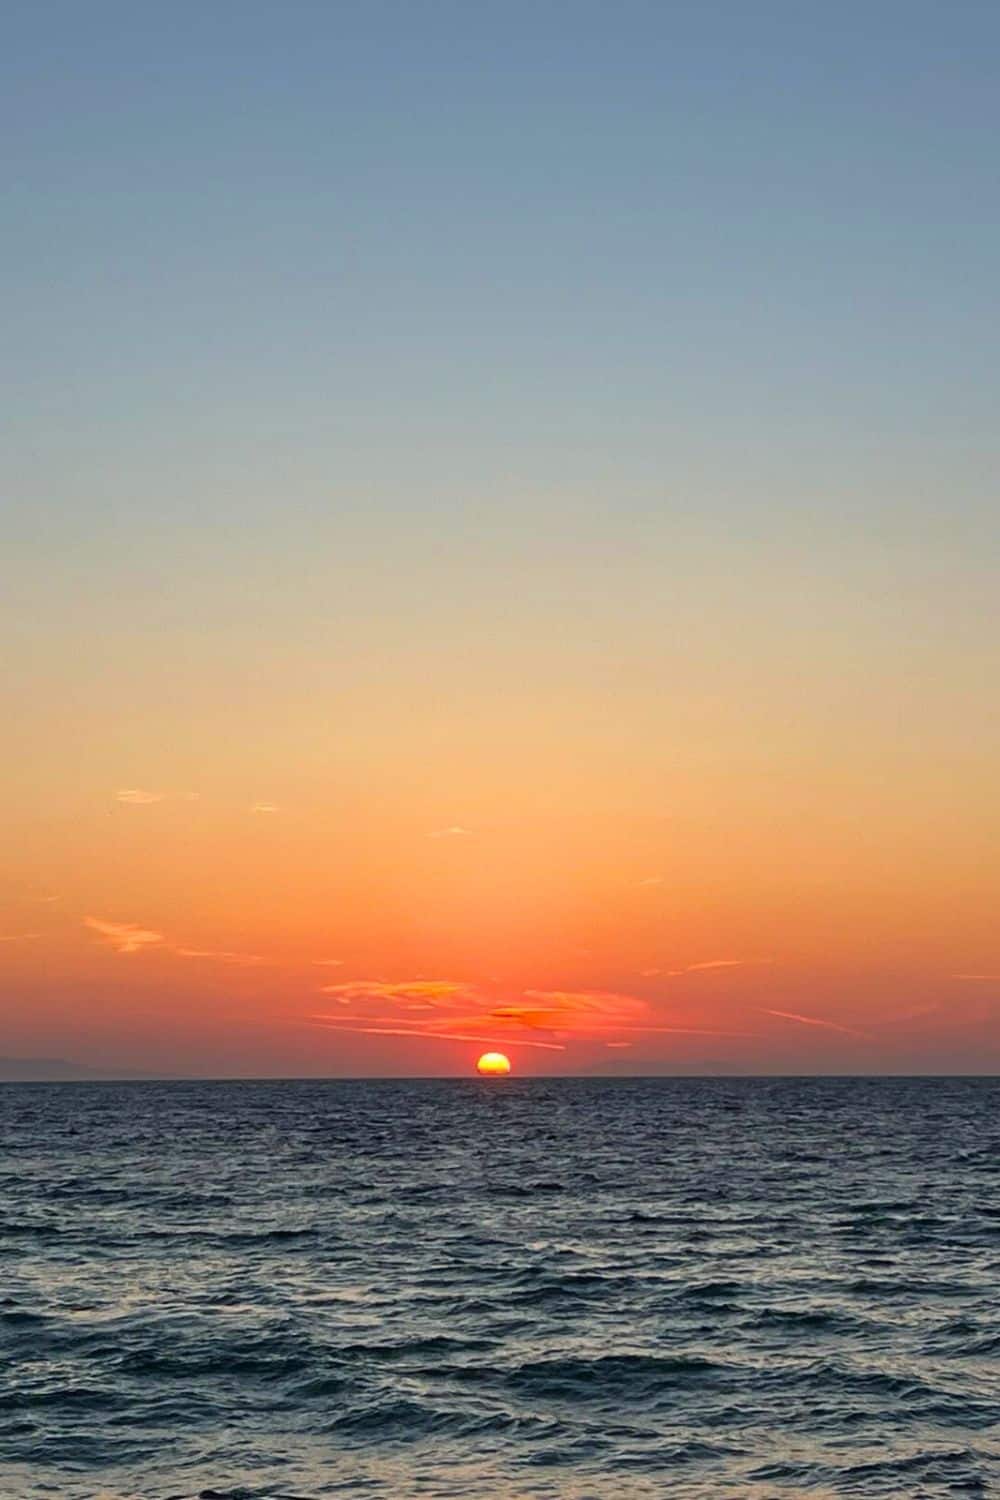 A serene sunset over the ocean with the sun dipping low on the horizon, casting a warm orange glow against the fading light of the sky. The gentle waves of the sea are capturing the last rays of the day, creating a tranquil and picturesque scene.